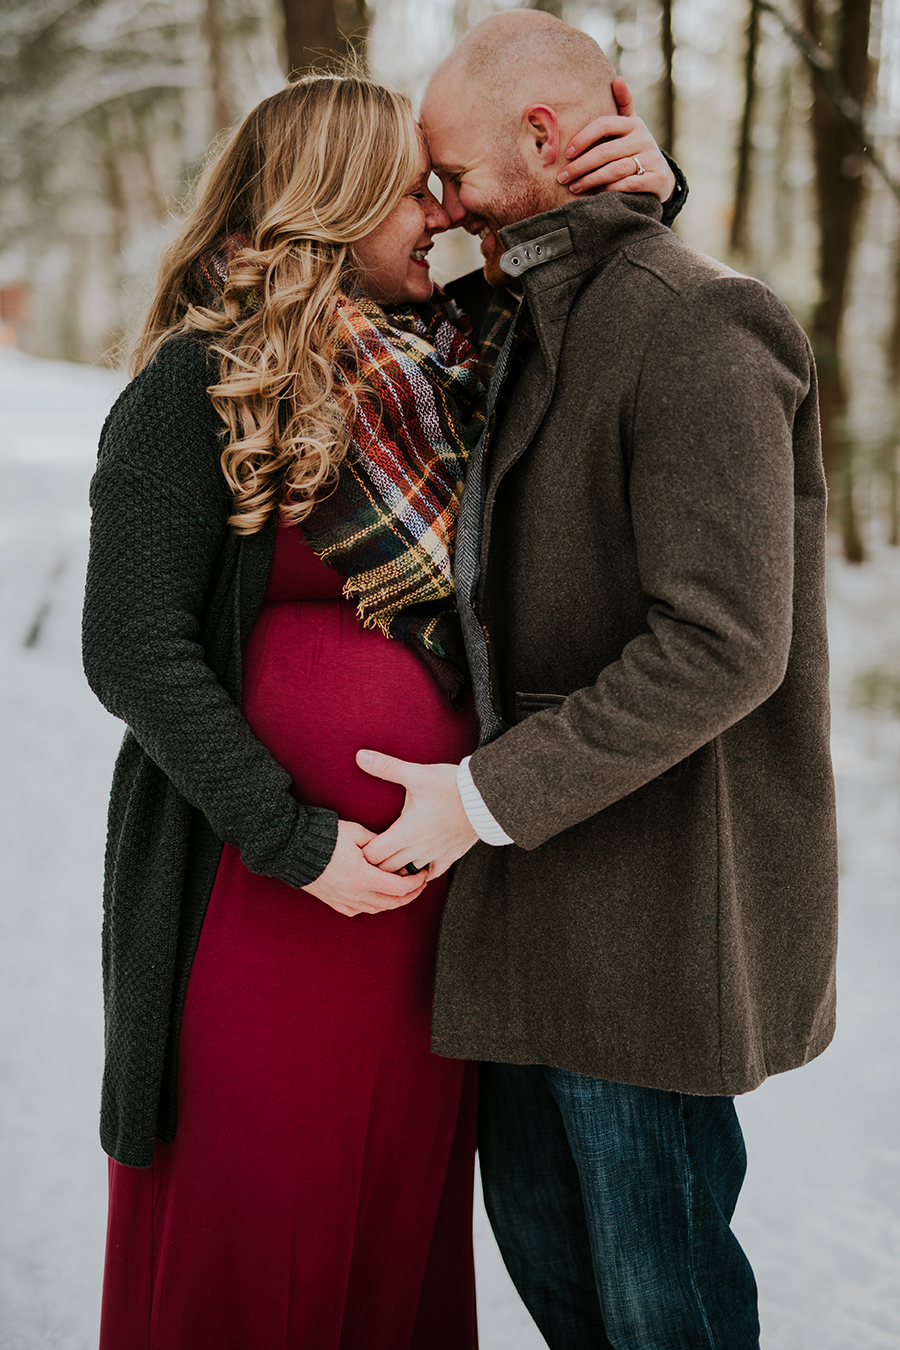  Knoxville, TN Smoky Mountain maternity photos, smiles and hands.